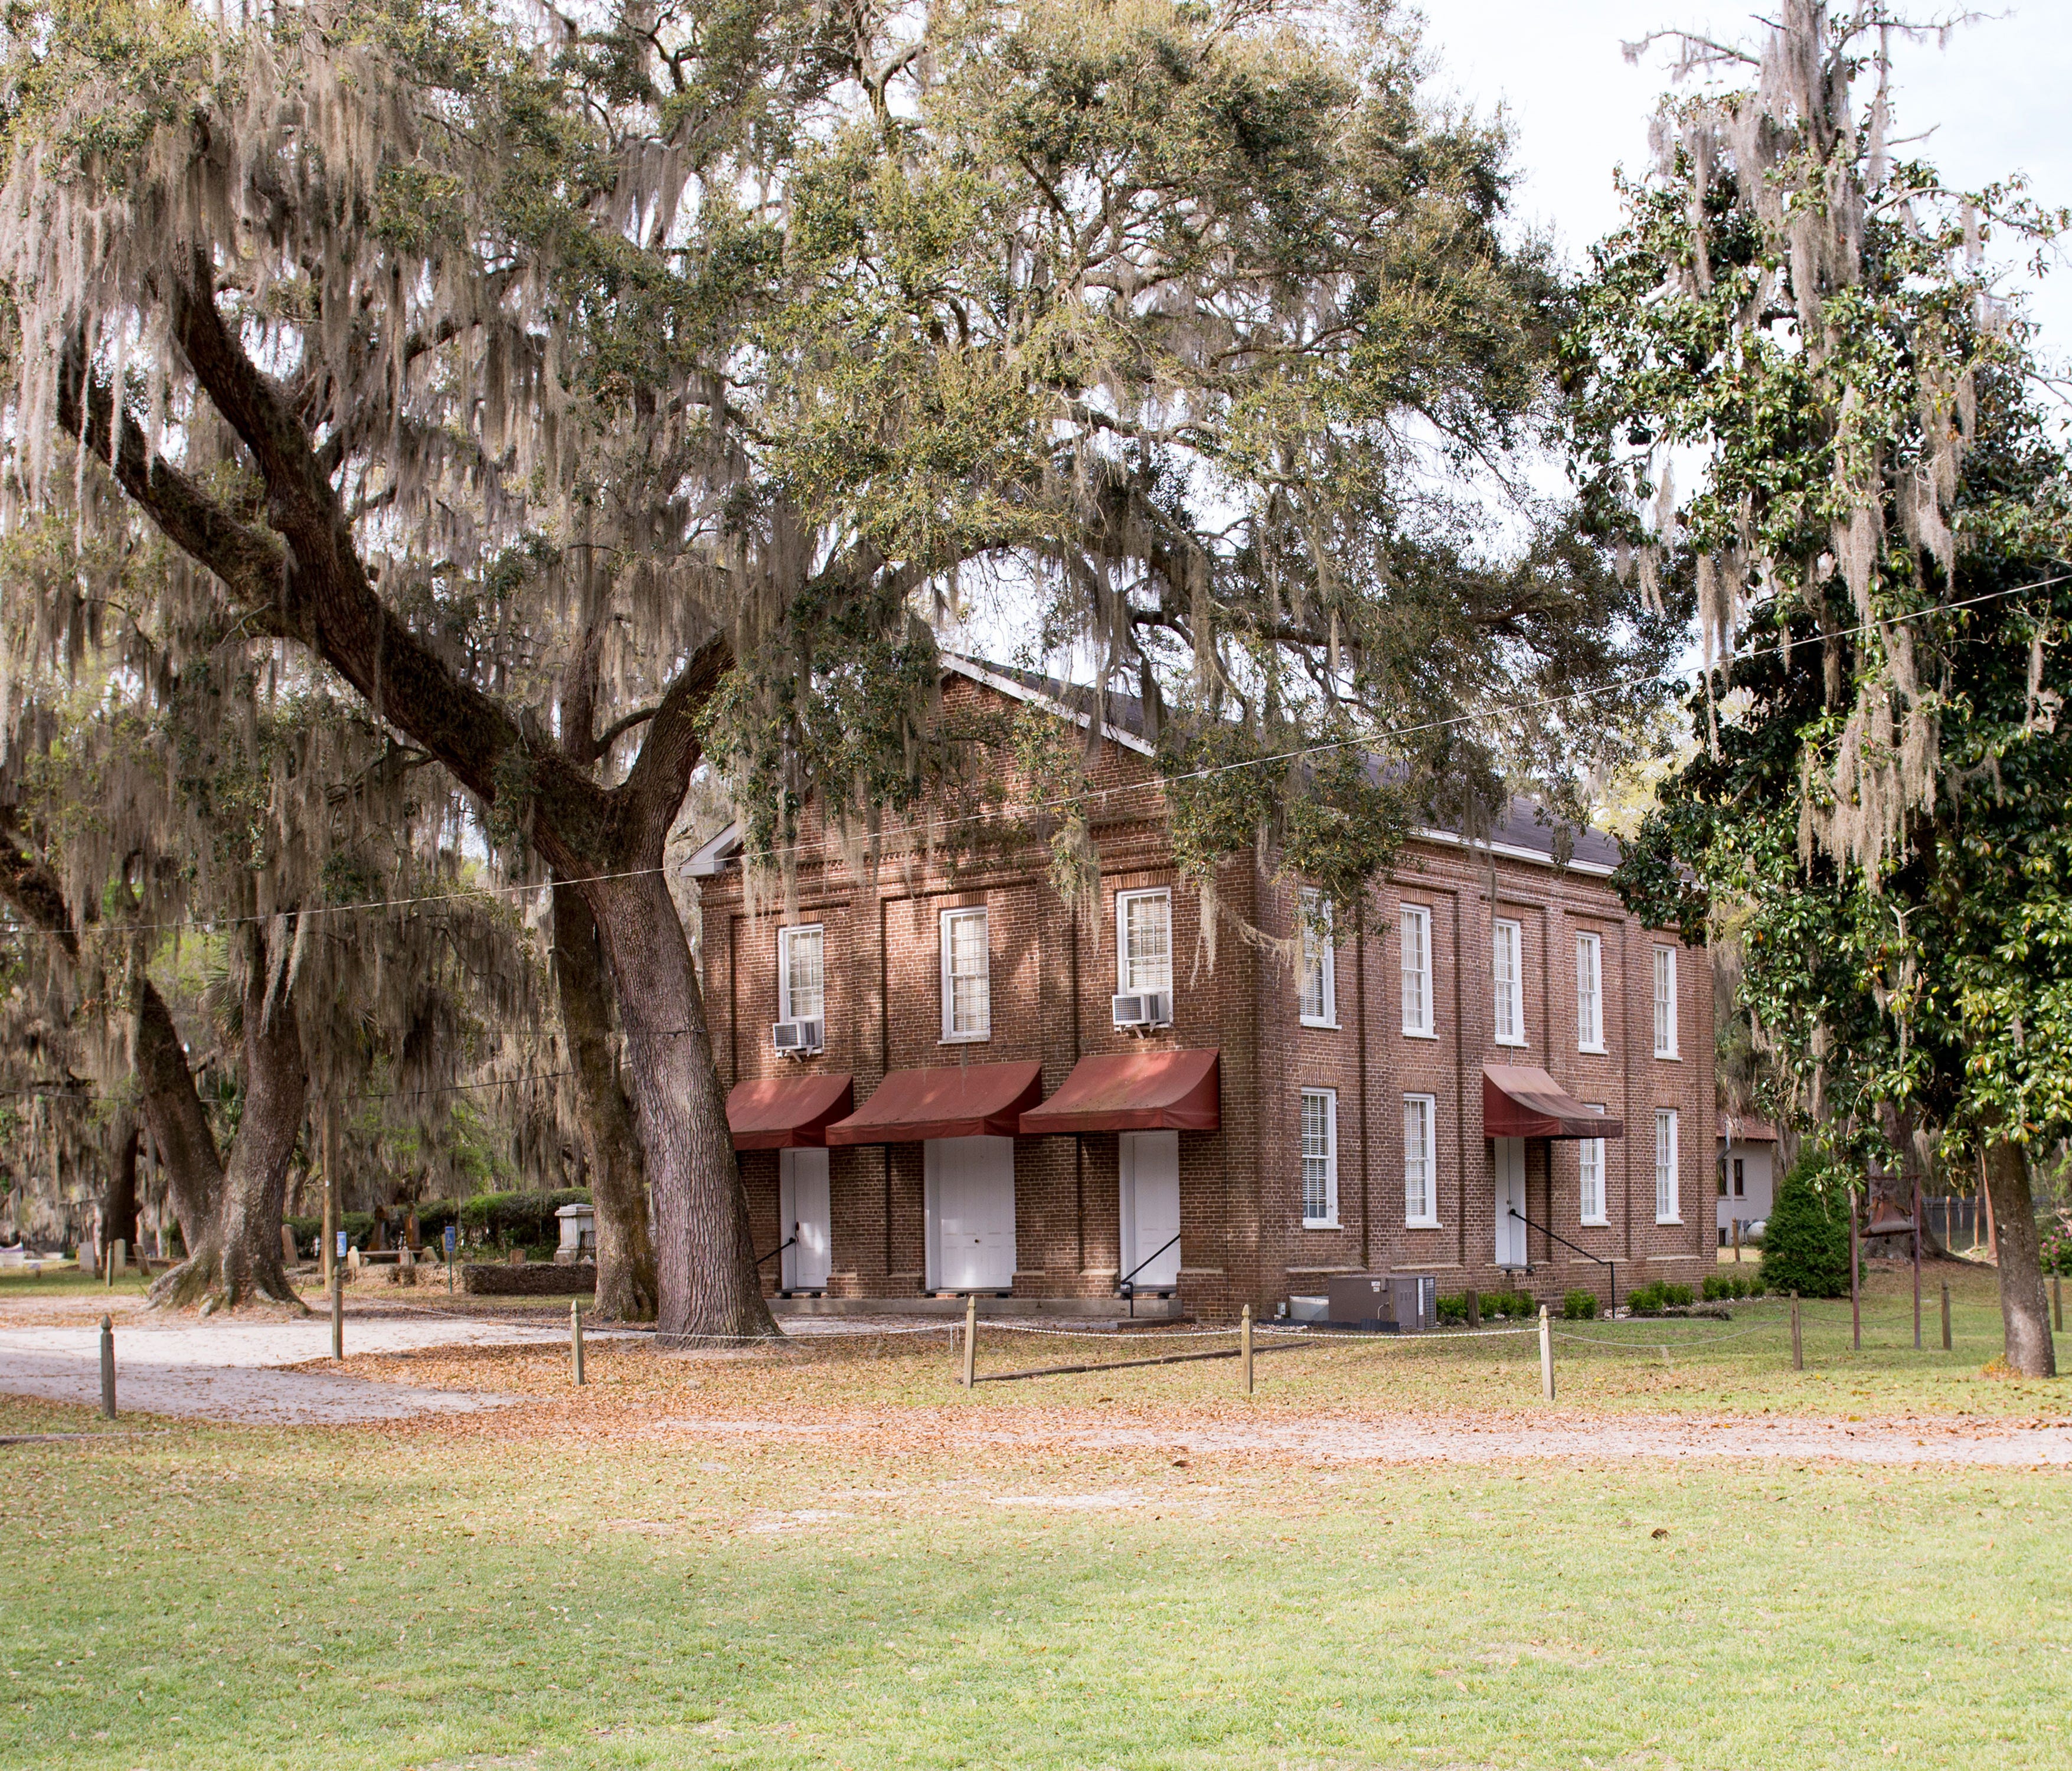 Penn School, Frogmore, S.C.: Founded in 1862, the Penn School was one of the first schools in the South for freed slaves, operating until the post-World War II years when many students left and the school eventually closed and was deteriorating.